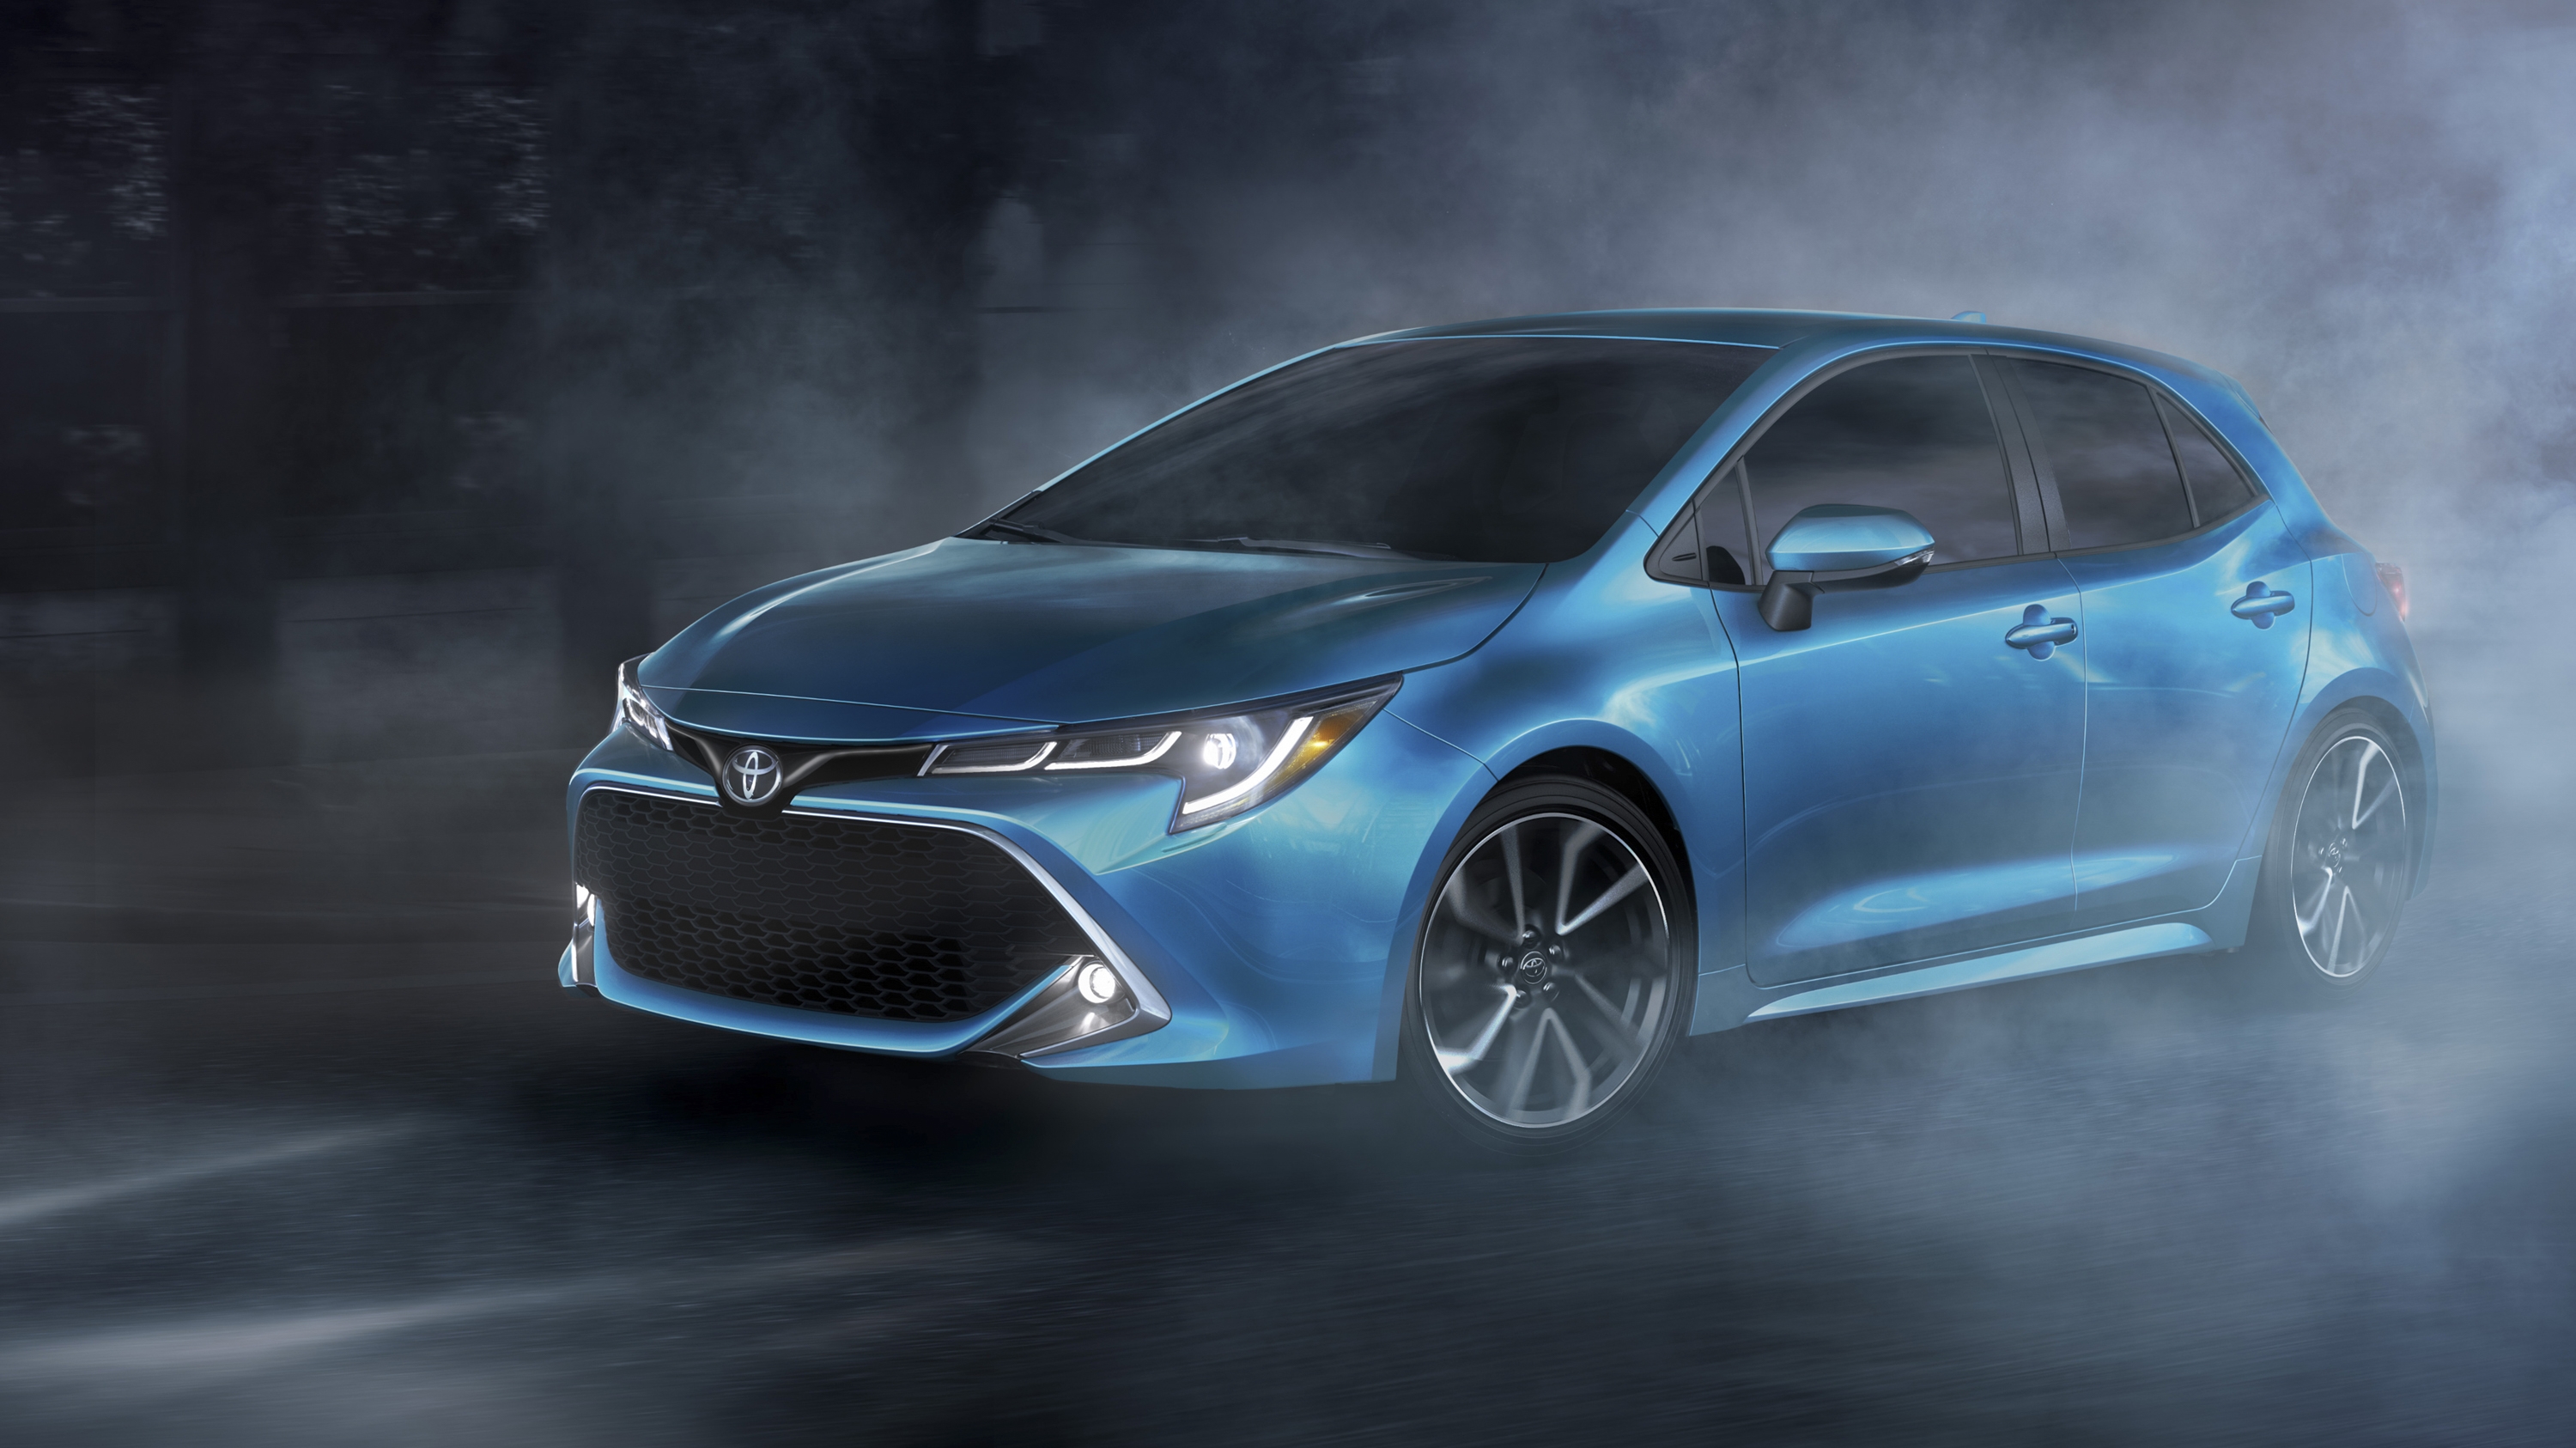 Toyota Corolla Hatchback Picture, Photo, Wallpaper